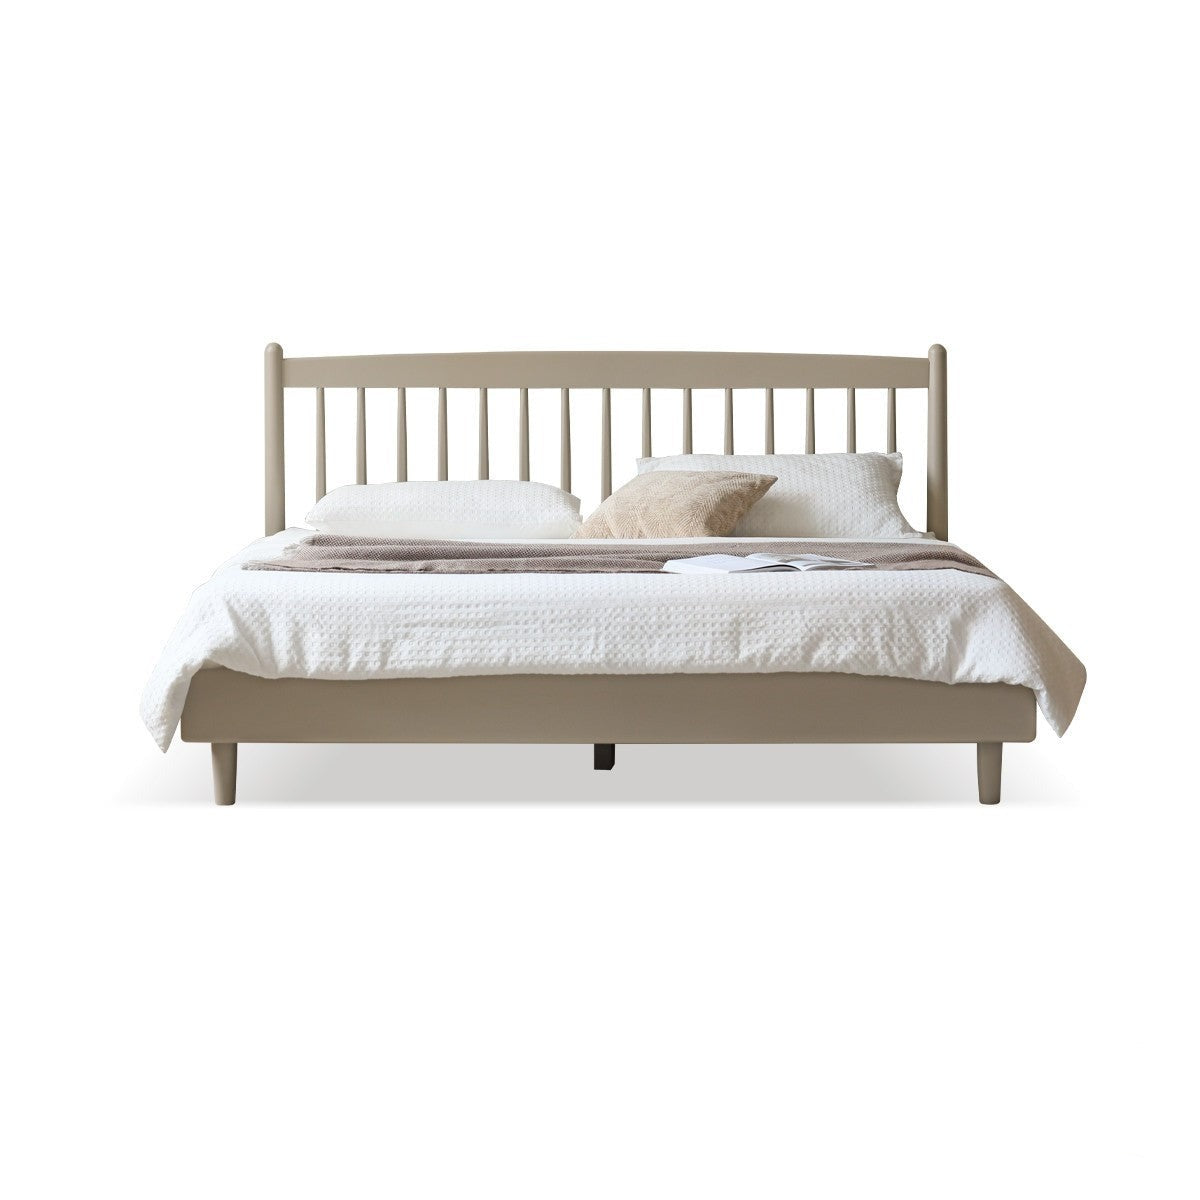 Light luxury Ash solid wood bed"